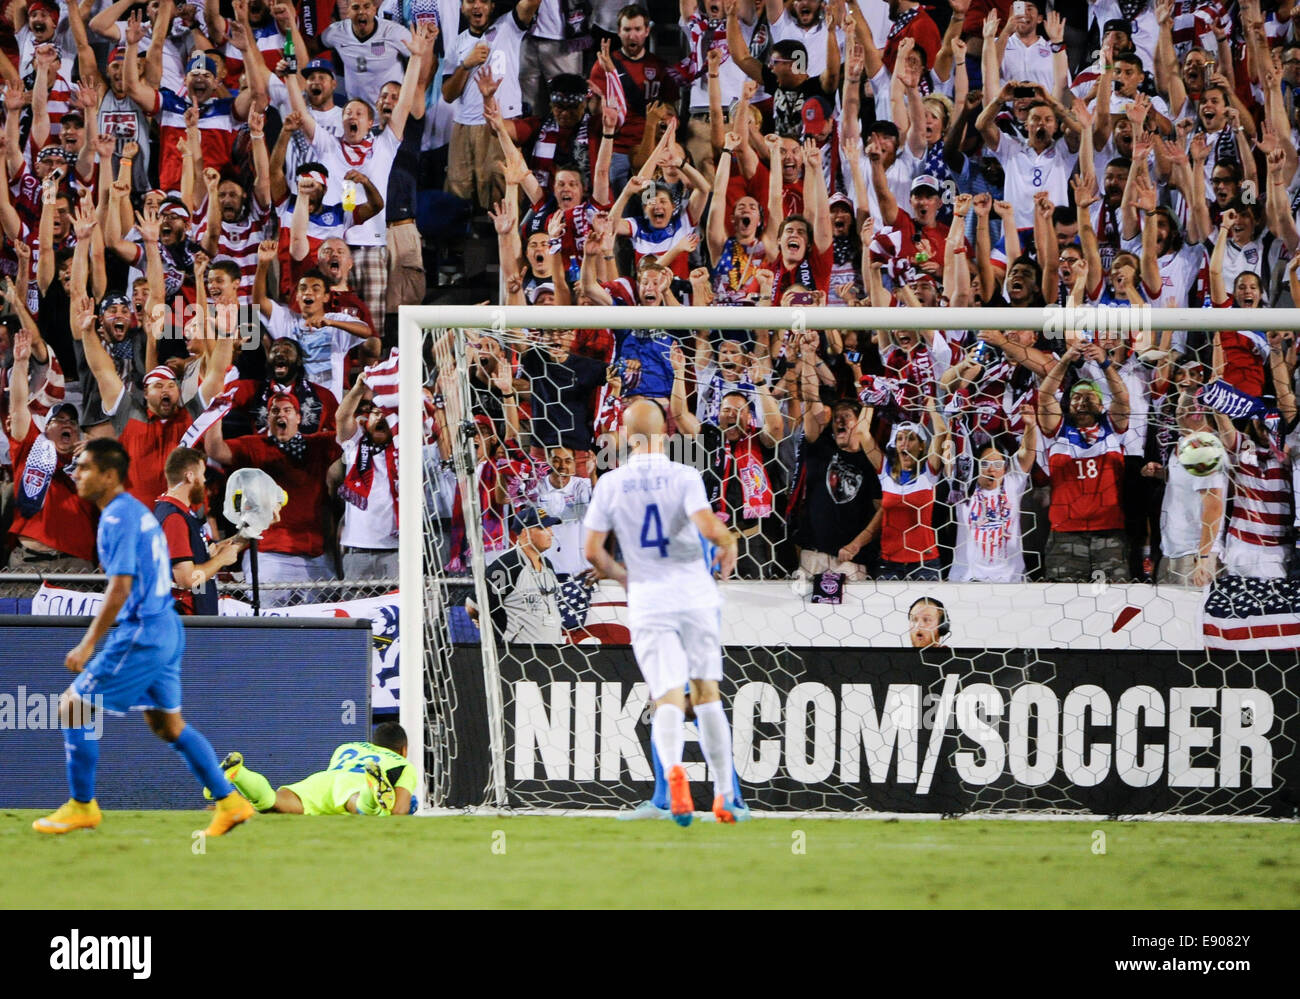 Florida, USA. 14th Oct, 2014. US fans cheer in the stands after United States Forward Jozy Altidore (not shown) scores past Honduras Goalkeeper Donis Escober (22) during an international friendly between the US Men's National Team and Honduras at FAU Stadium in Boca Raton, Florida © Action Plus Sports/Alamy Live News Stock Photo